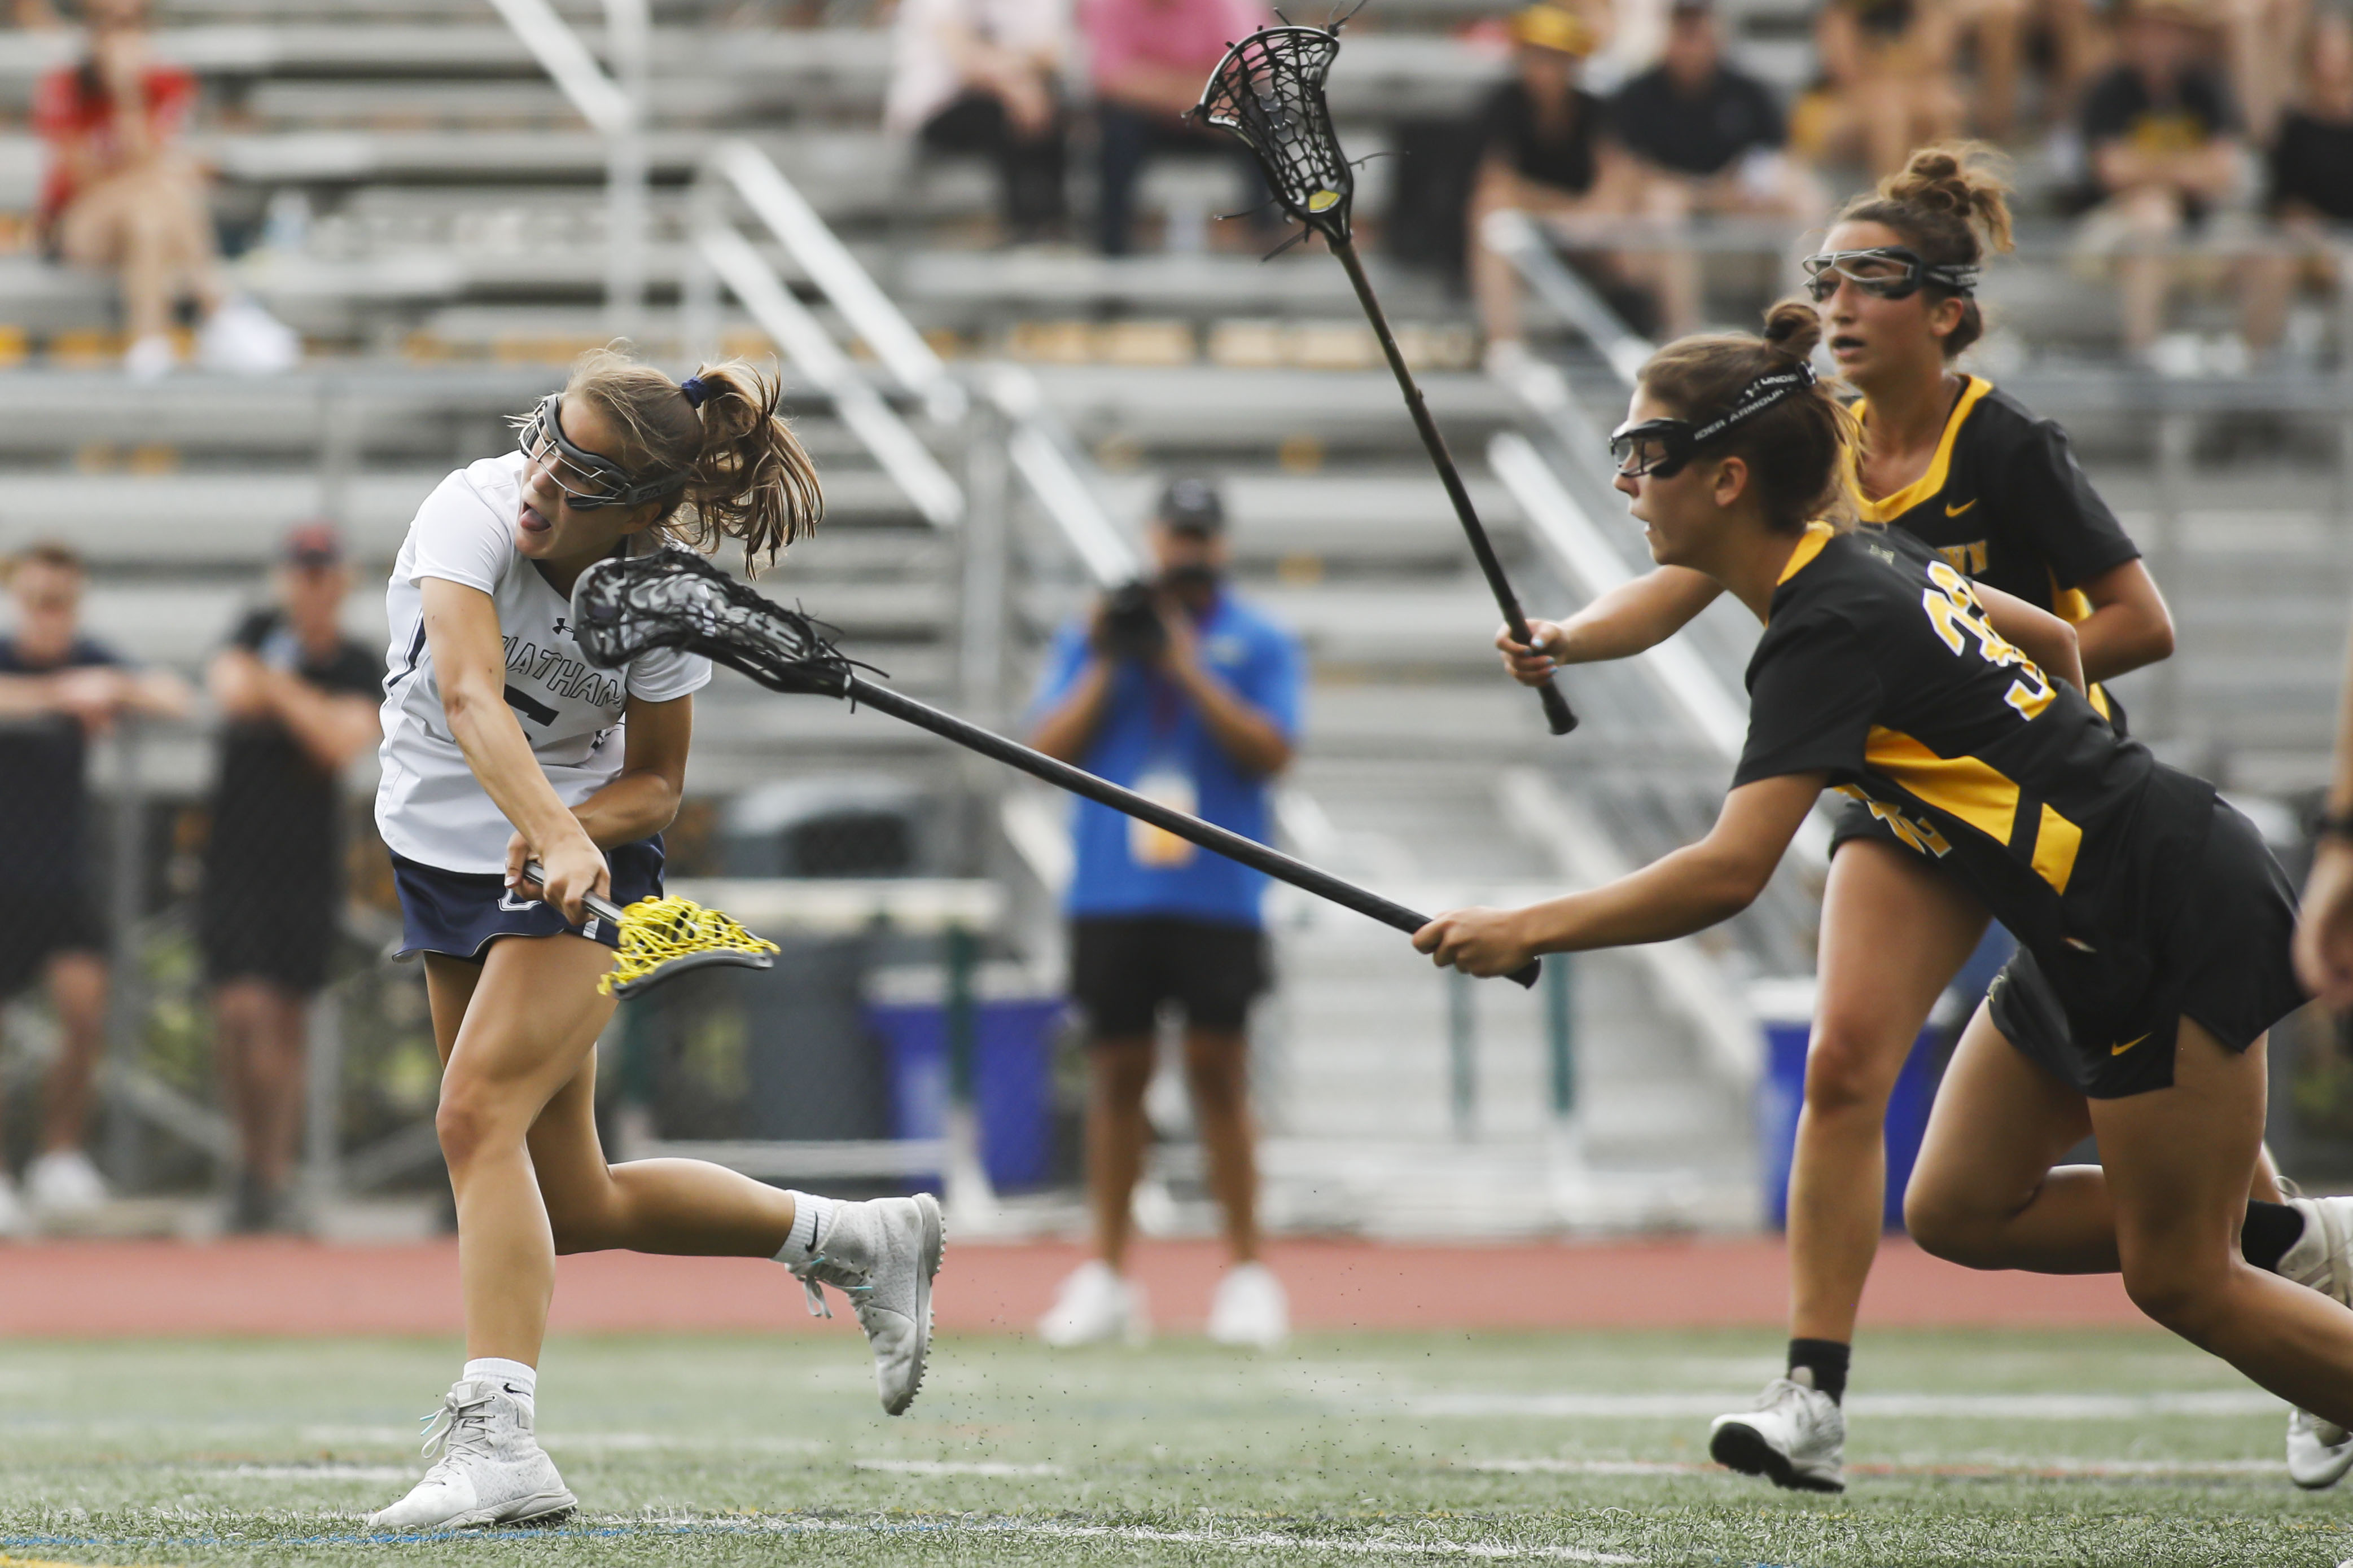 Girls Lacrosse: NJSIAA Group 3 final between Moorestown and Chatham on ...